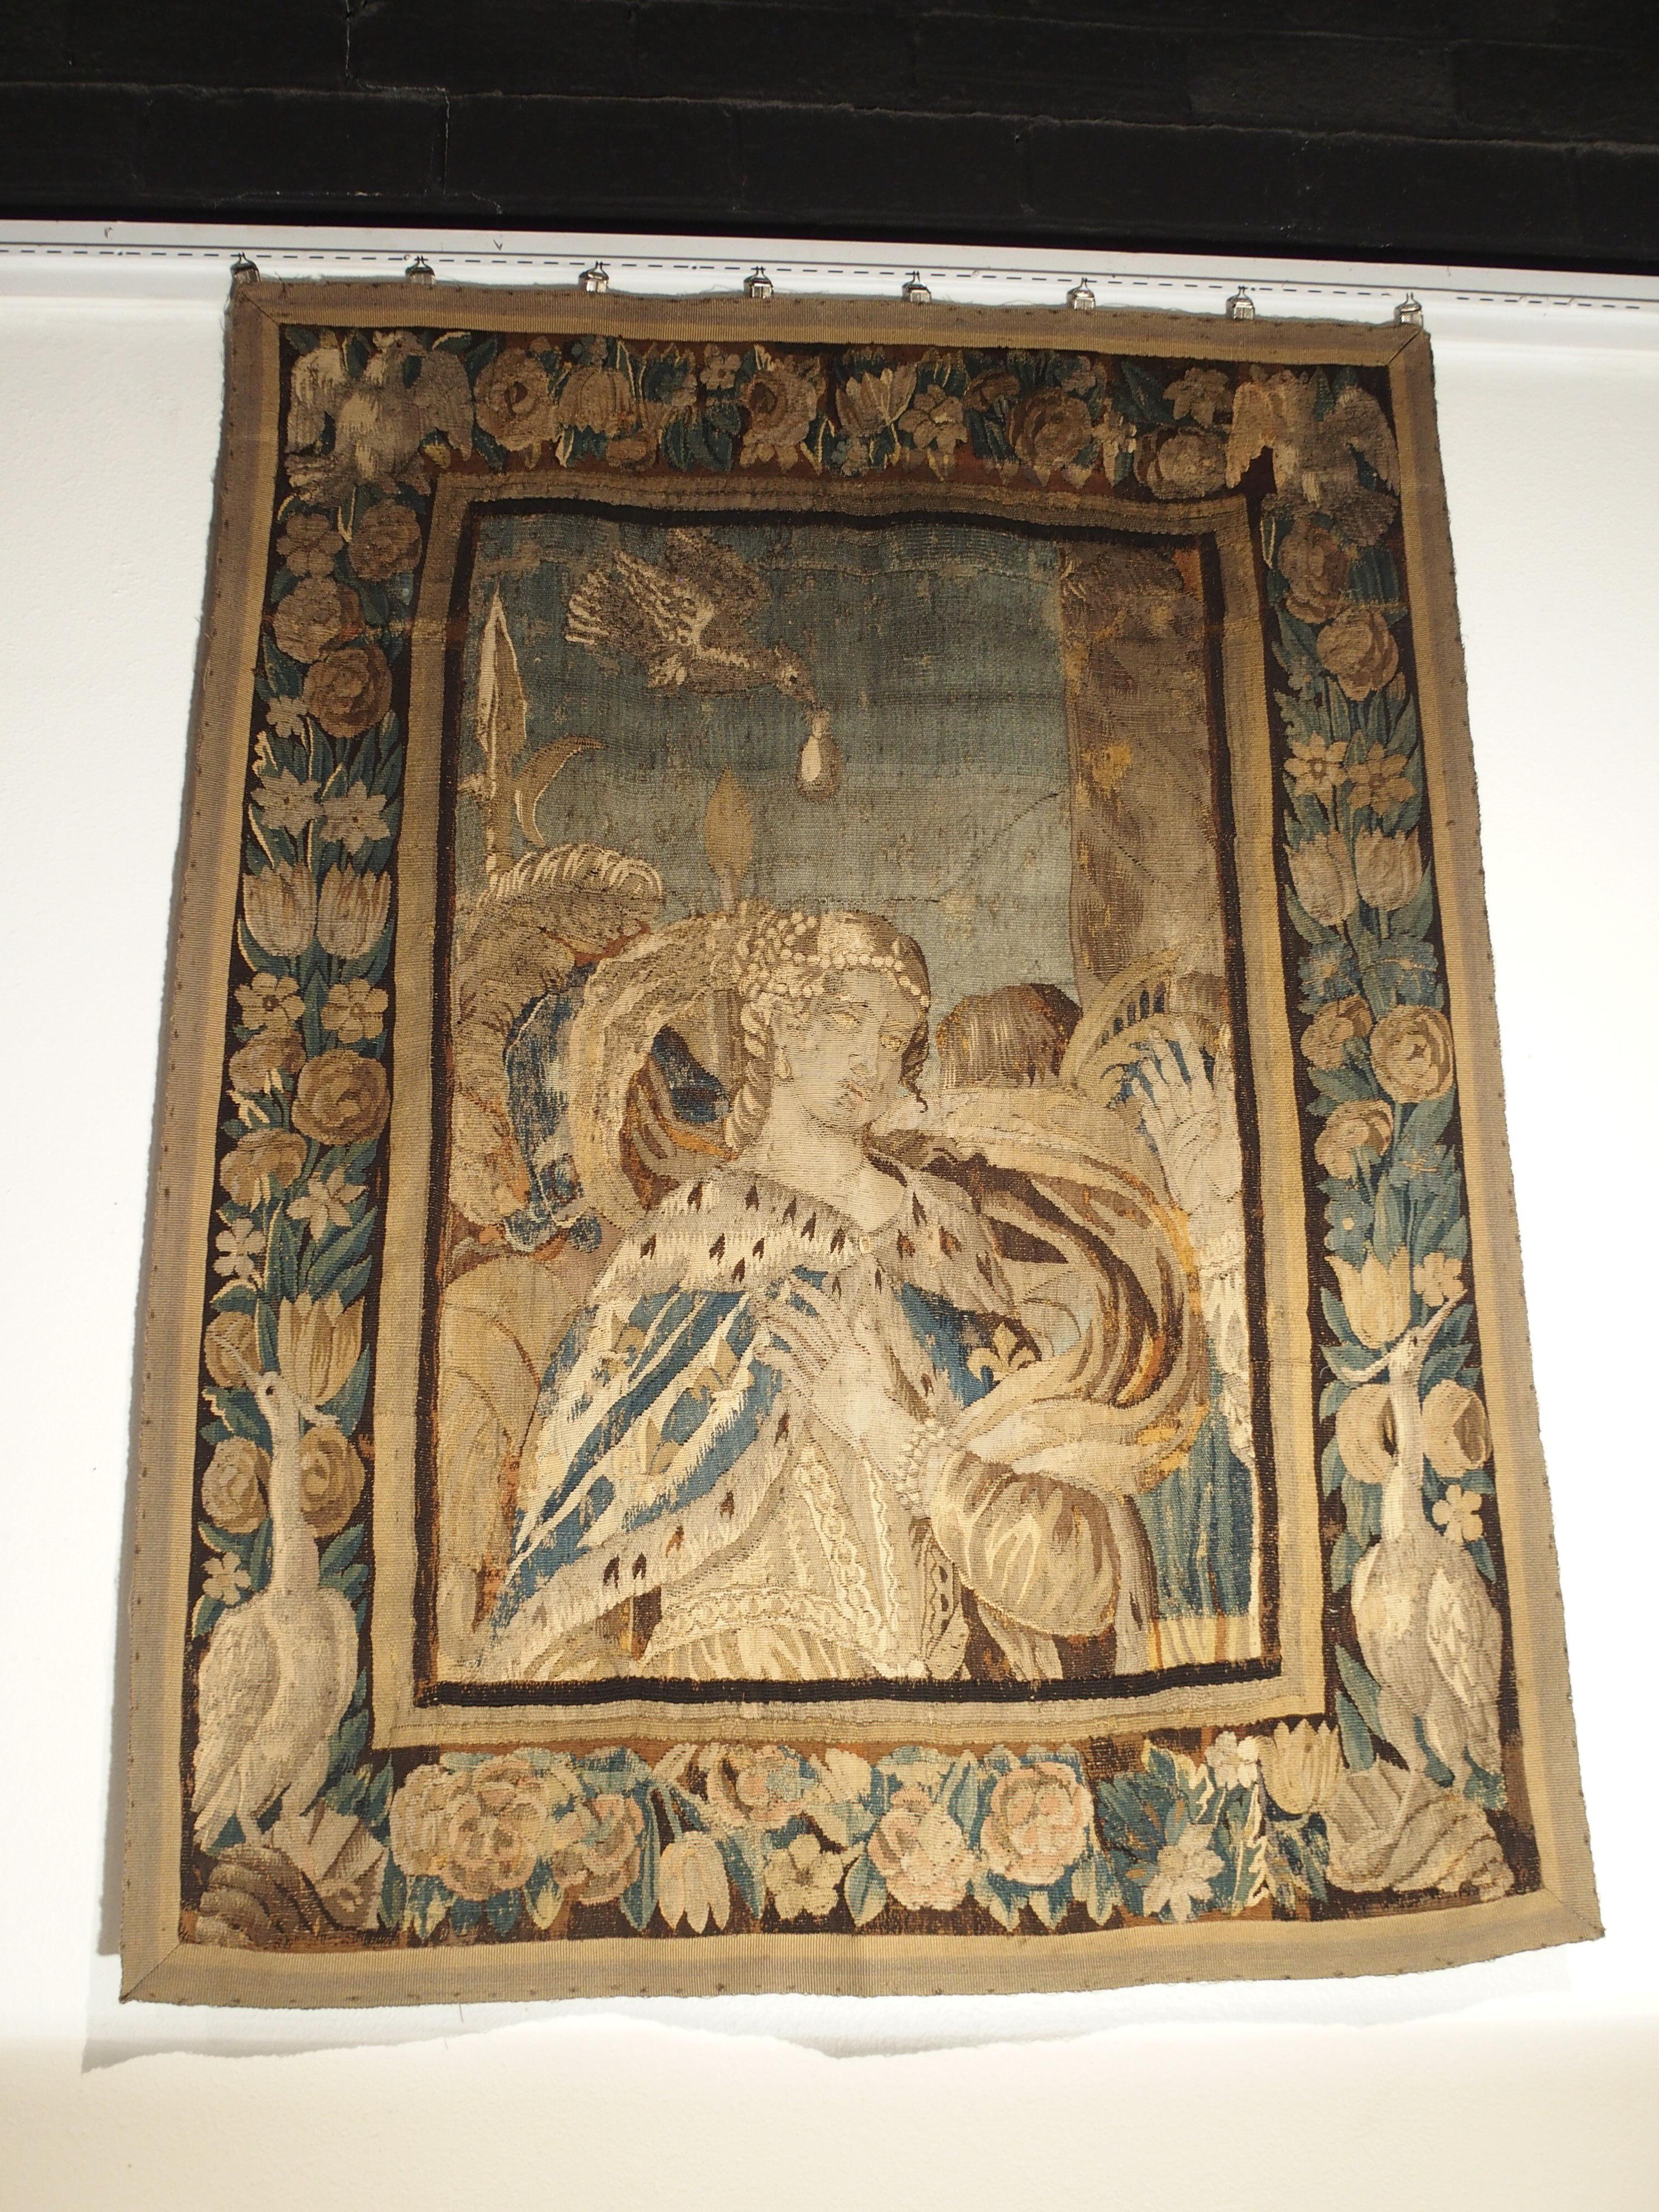 Hand-Woven 17th Century Tapestry Fragment with Ornate Border